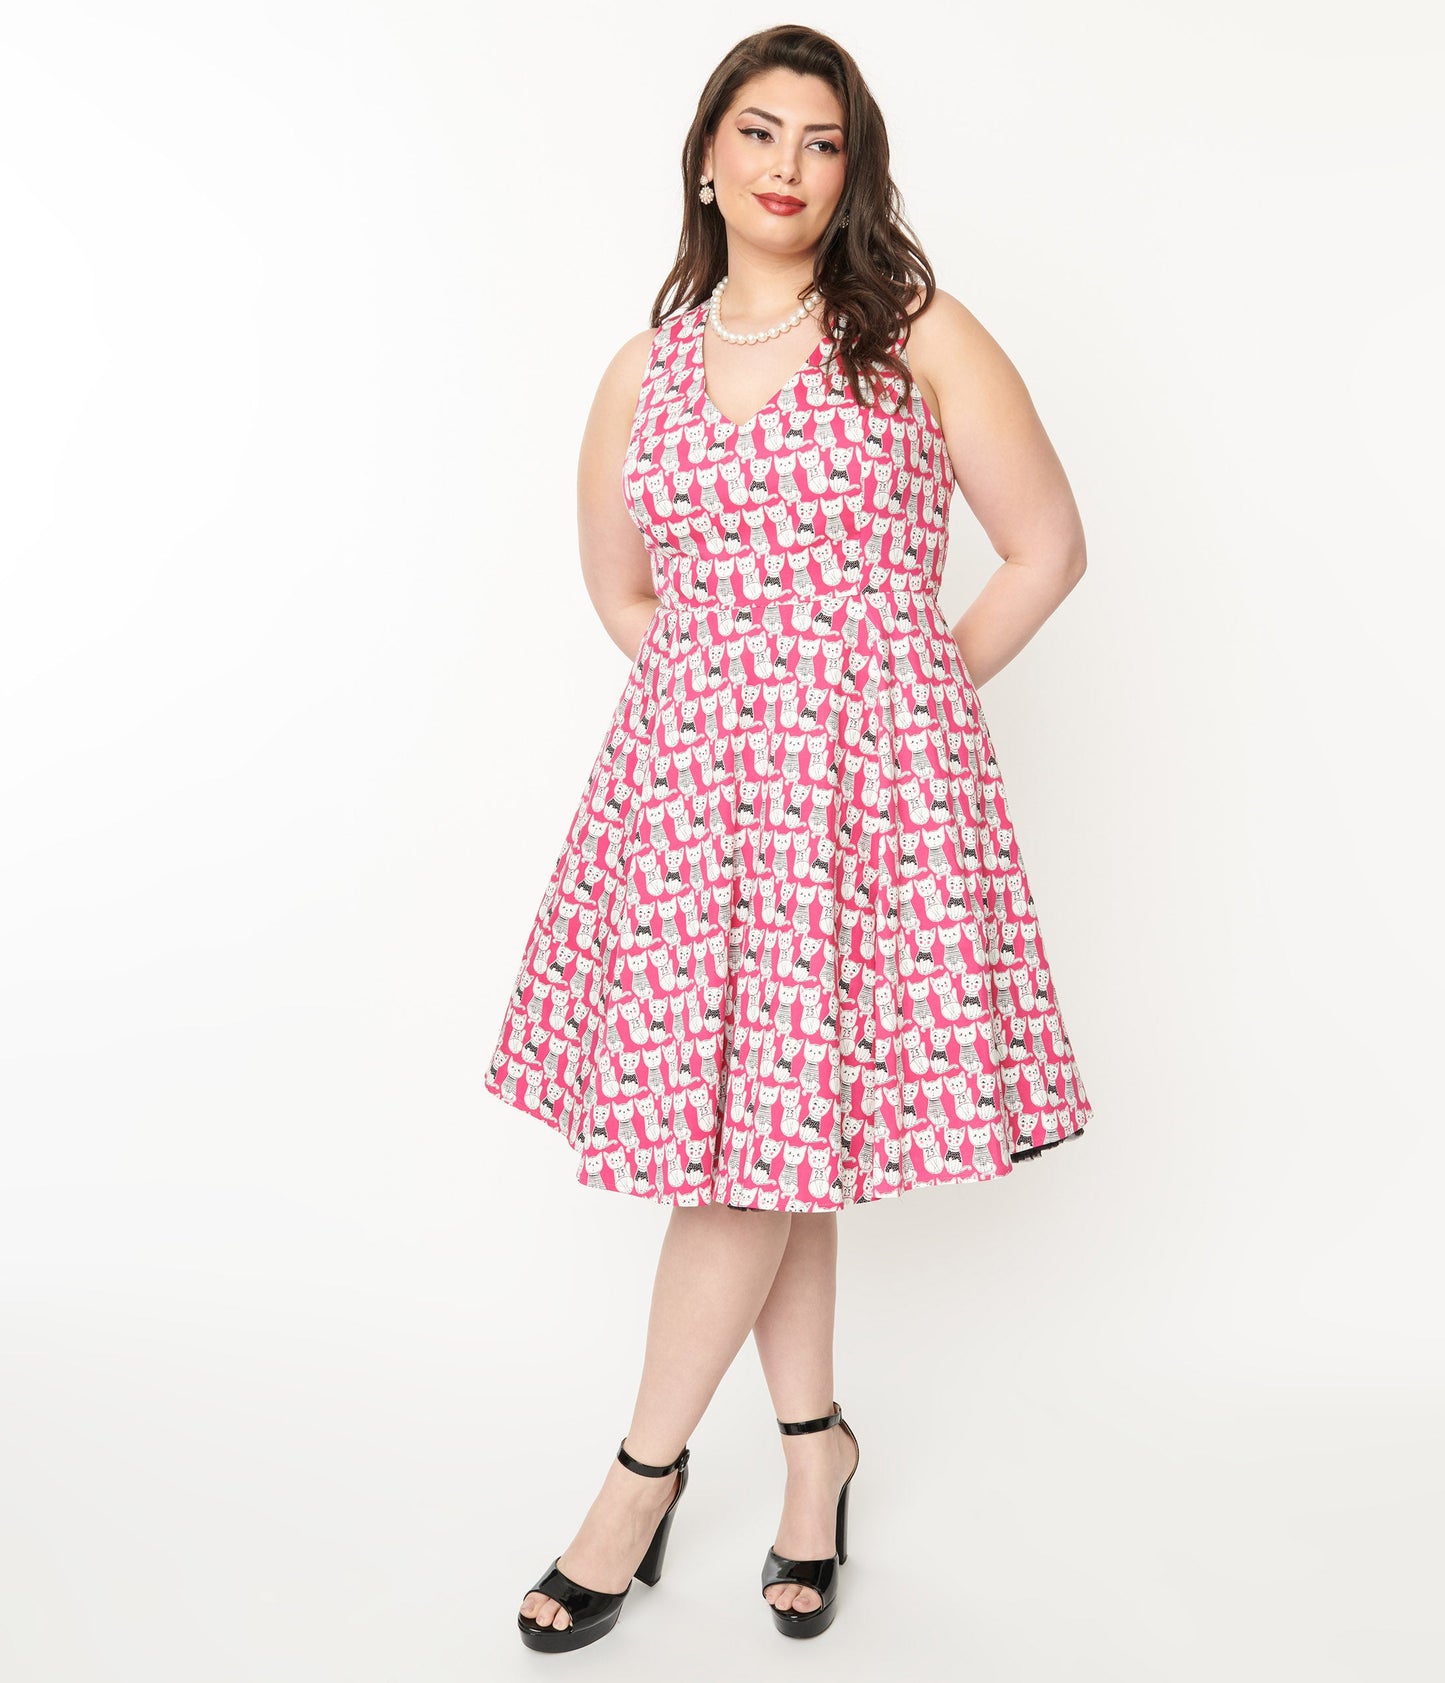 Plus Size 1950s Style Hot Pink Cat Print Sleeveless Swing Dress - Unique Vintage - Womens, DRESSES, FIT AND FLARE